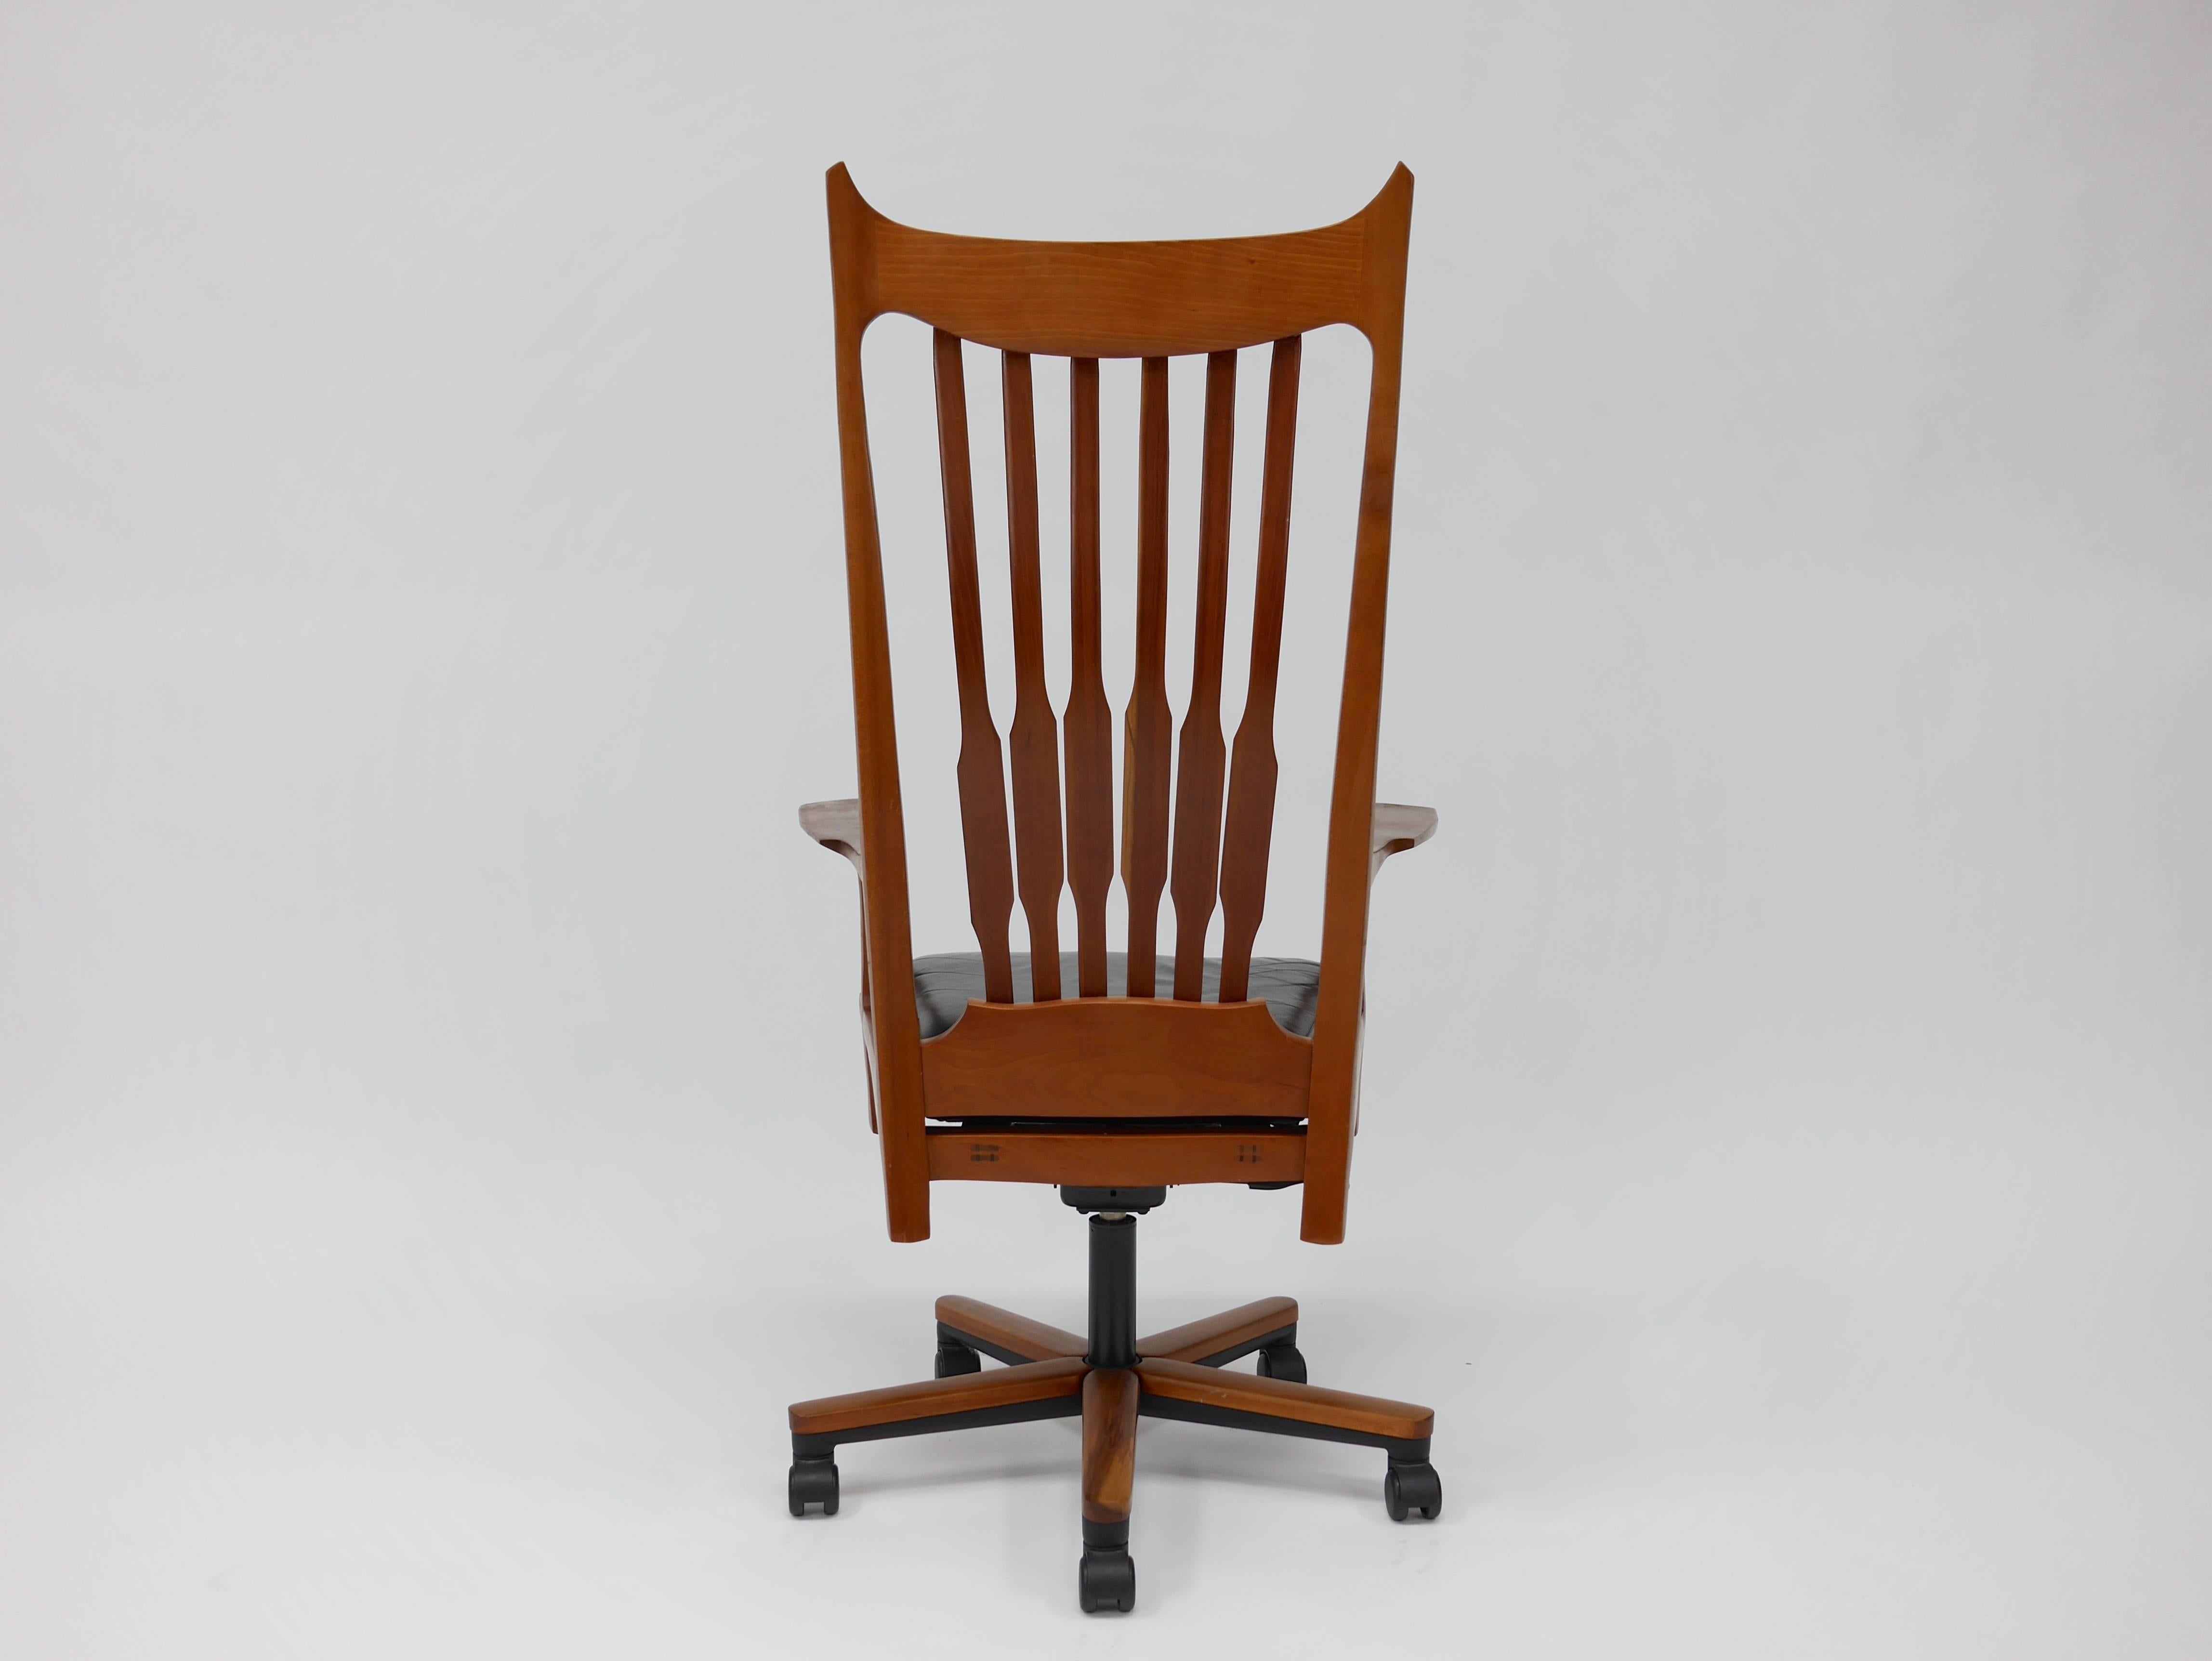 Studio movement office chair attributed to John Nyquist. Dramatic lines and spindle back with a leather upholstered seat. Through tenon joinery.
Measures approximately 28.5in wide x 21in deep x 51.5in tall (57in when fully raised), 20in seat height